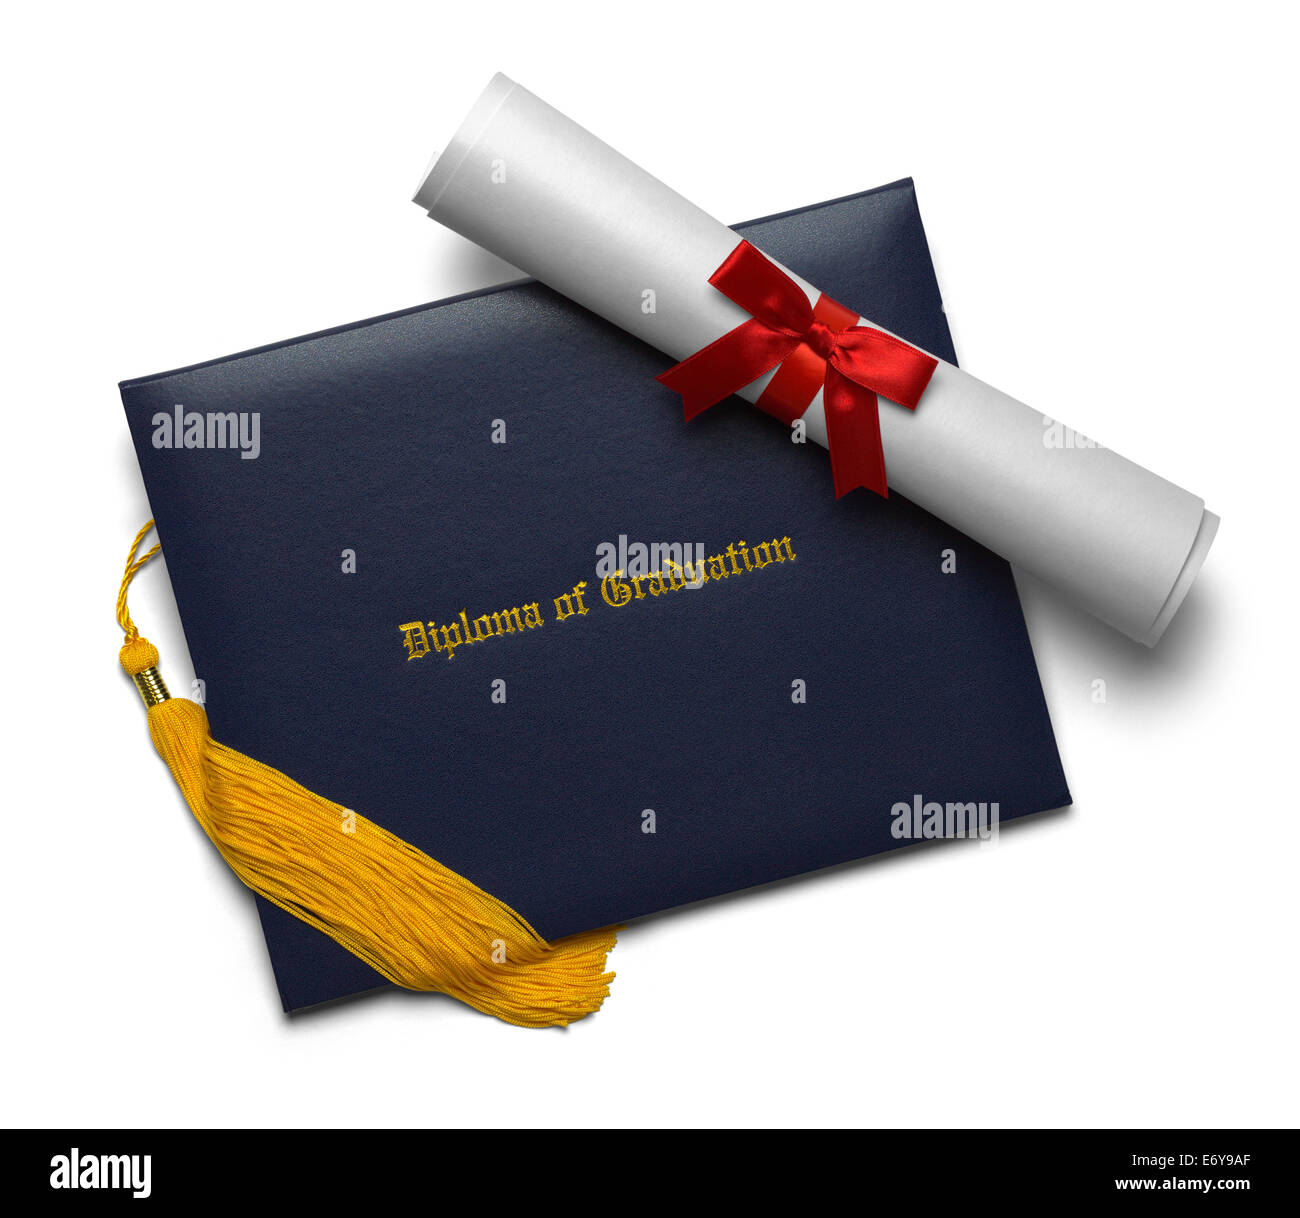 Blue Diploma of Graduation Cover with Degree Scroll and Tassel Isolated on White Background. Stock Photo